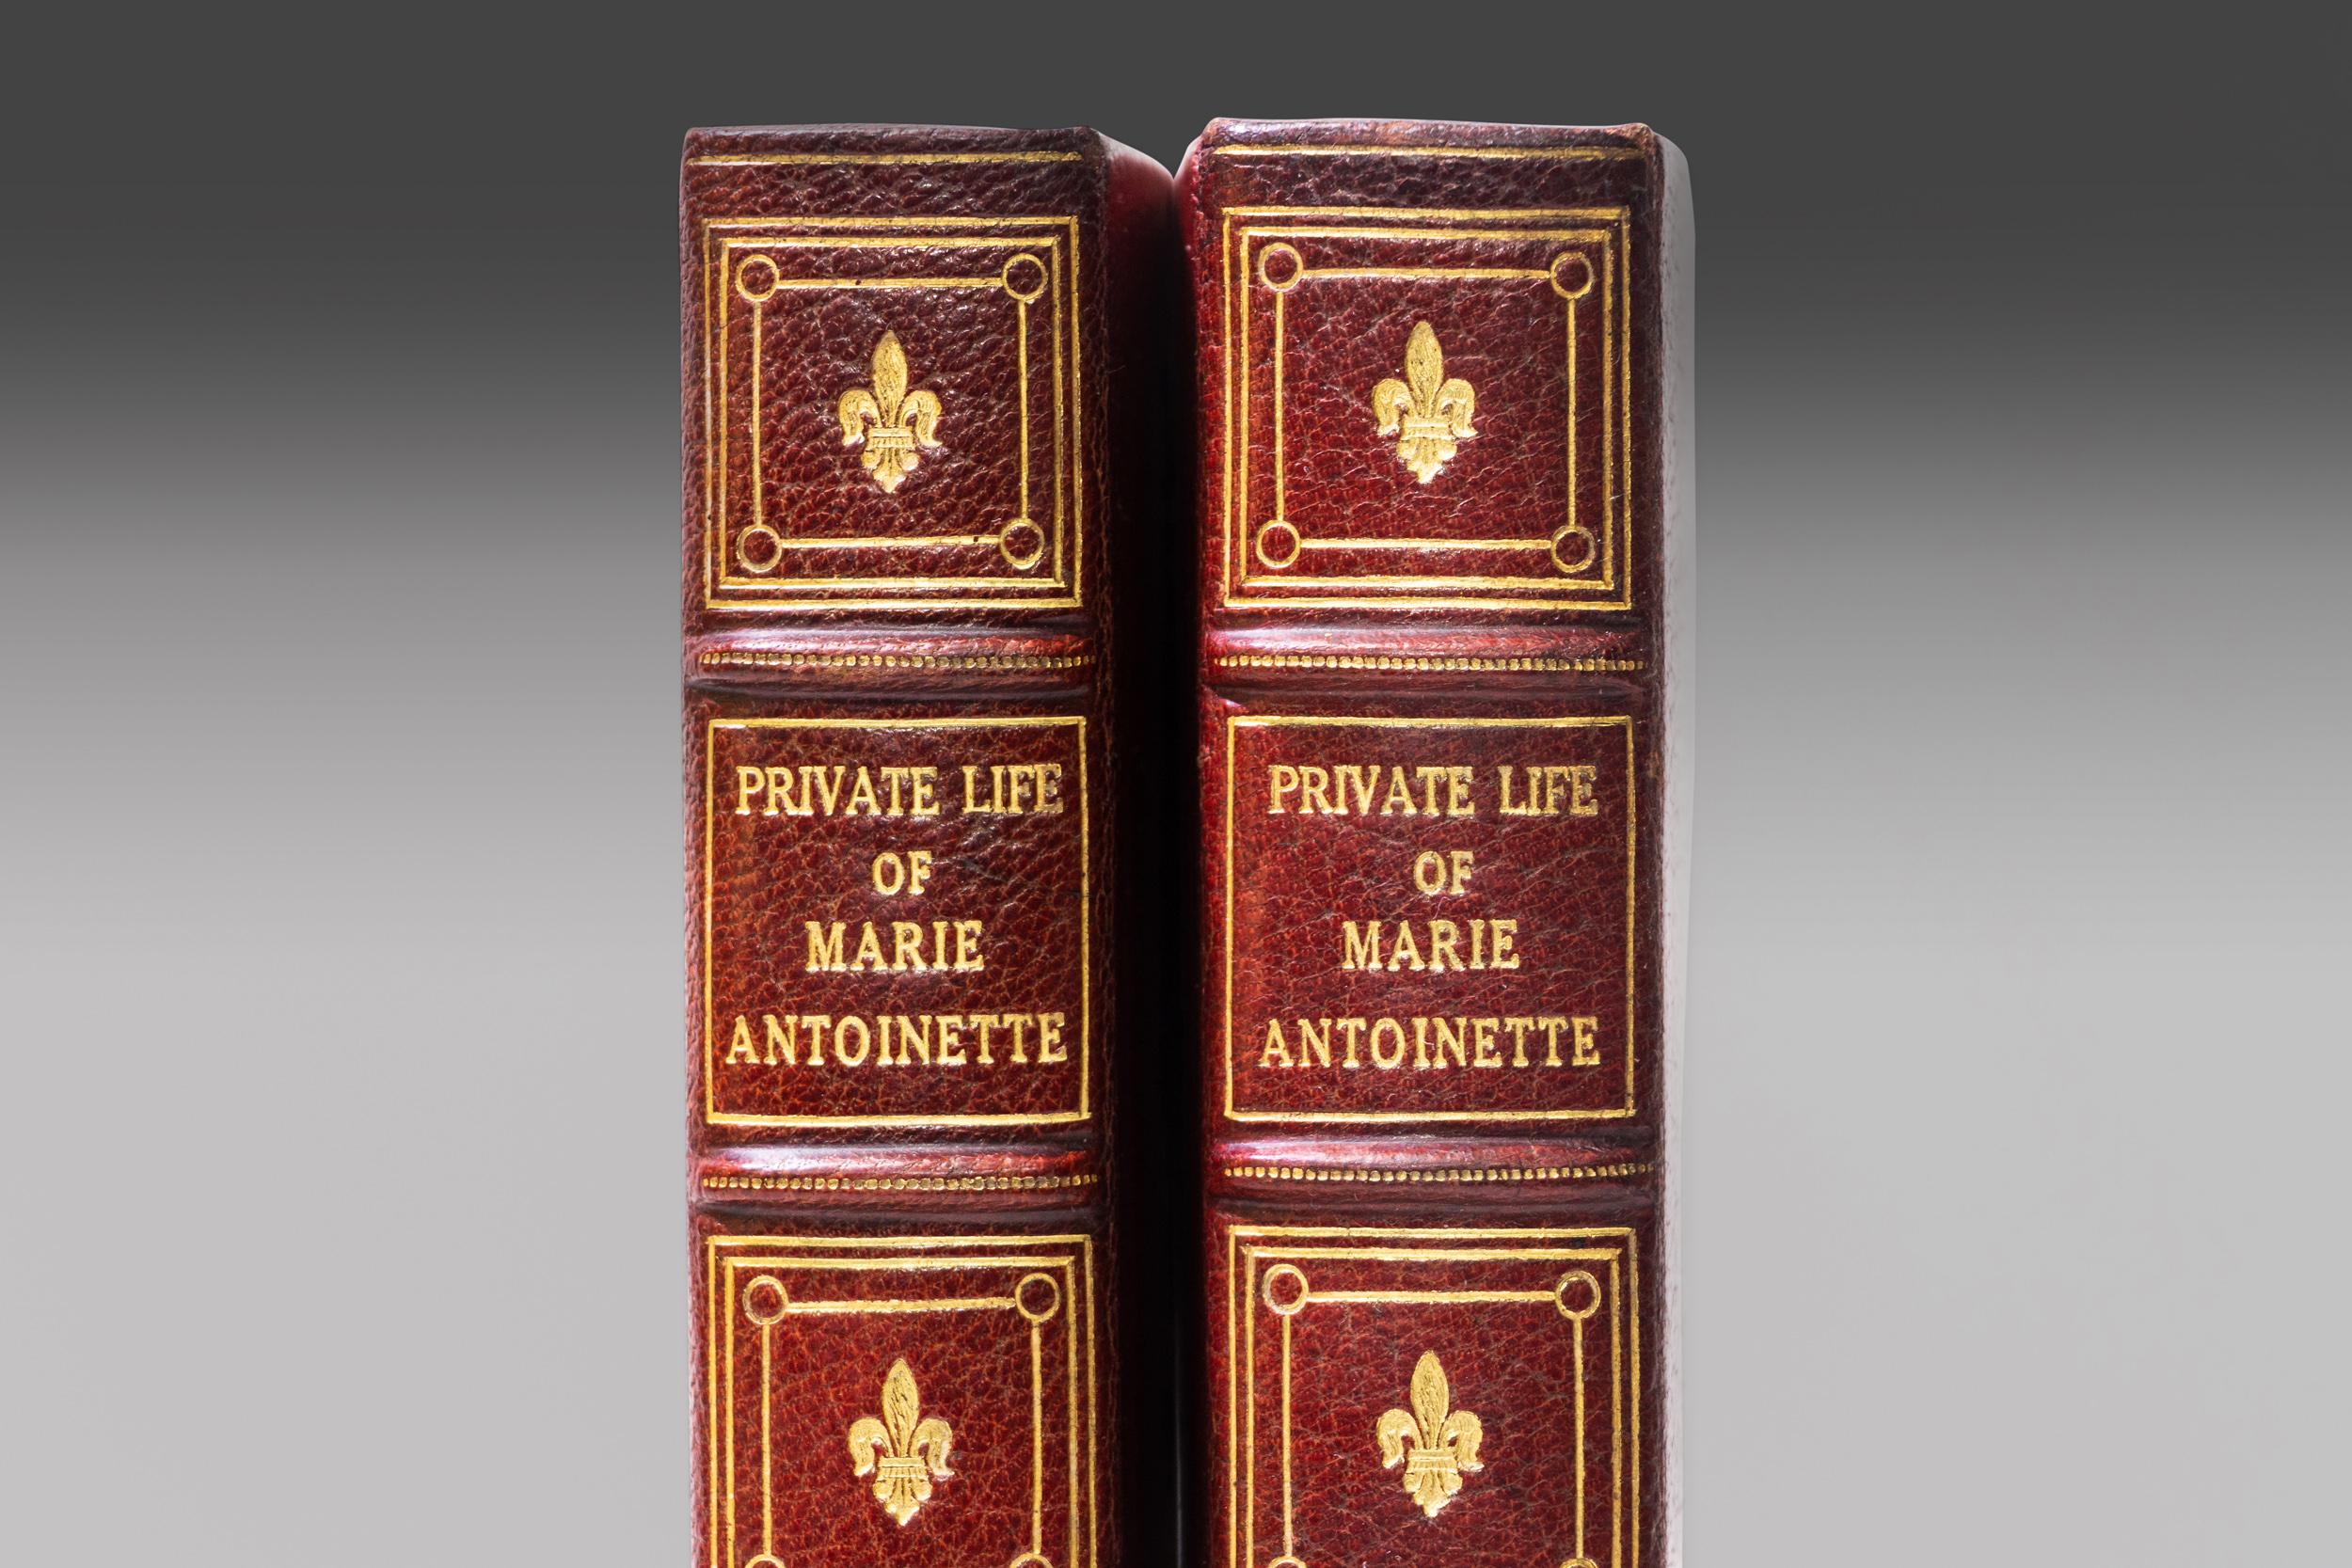 2 Volumes. Madame Campan, The Private Life of Marie Antoinette. Bound in 3/4 red morocco. Linen boards. Raised bands. Decorative gilt symbols on spines. Top edges gilt. Cork endpapers. Illustrated. Published: New York; Brentano's 1917